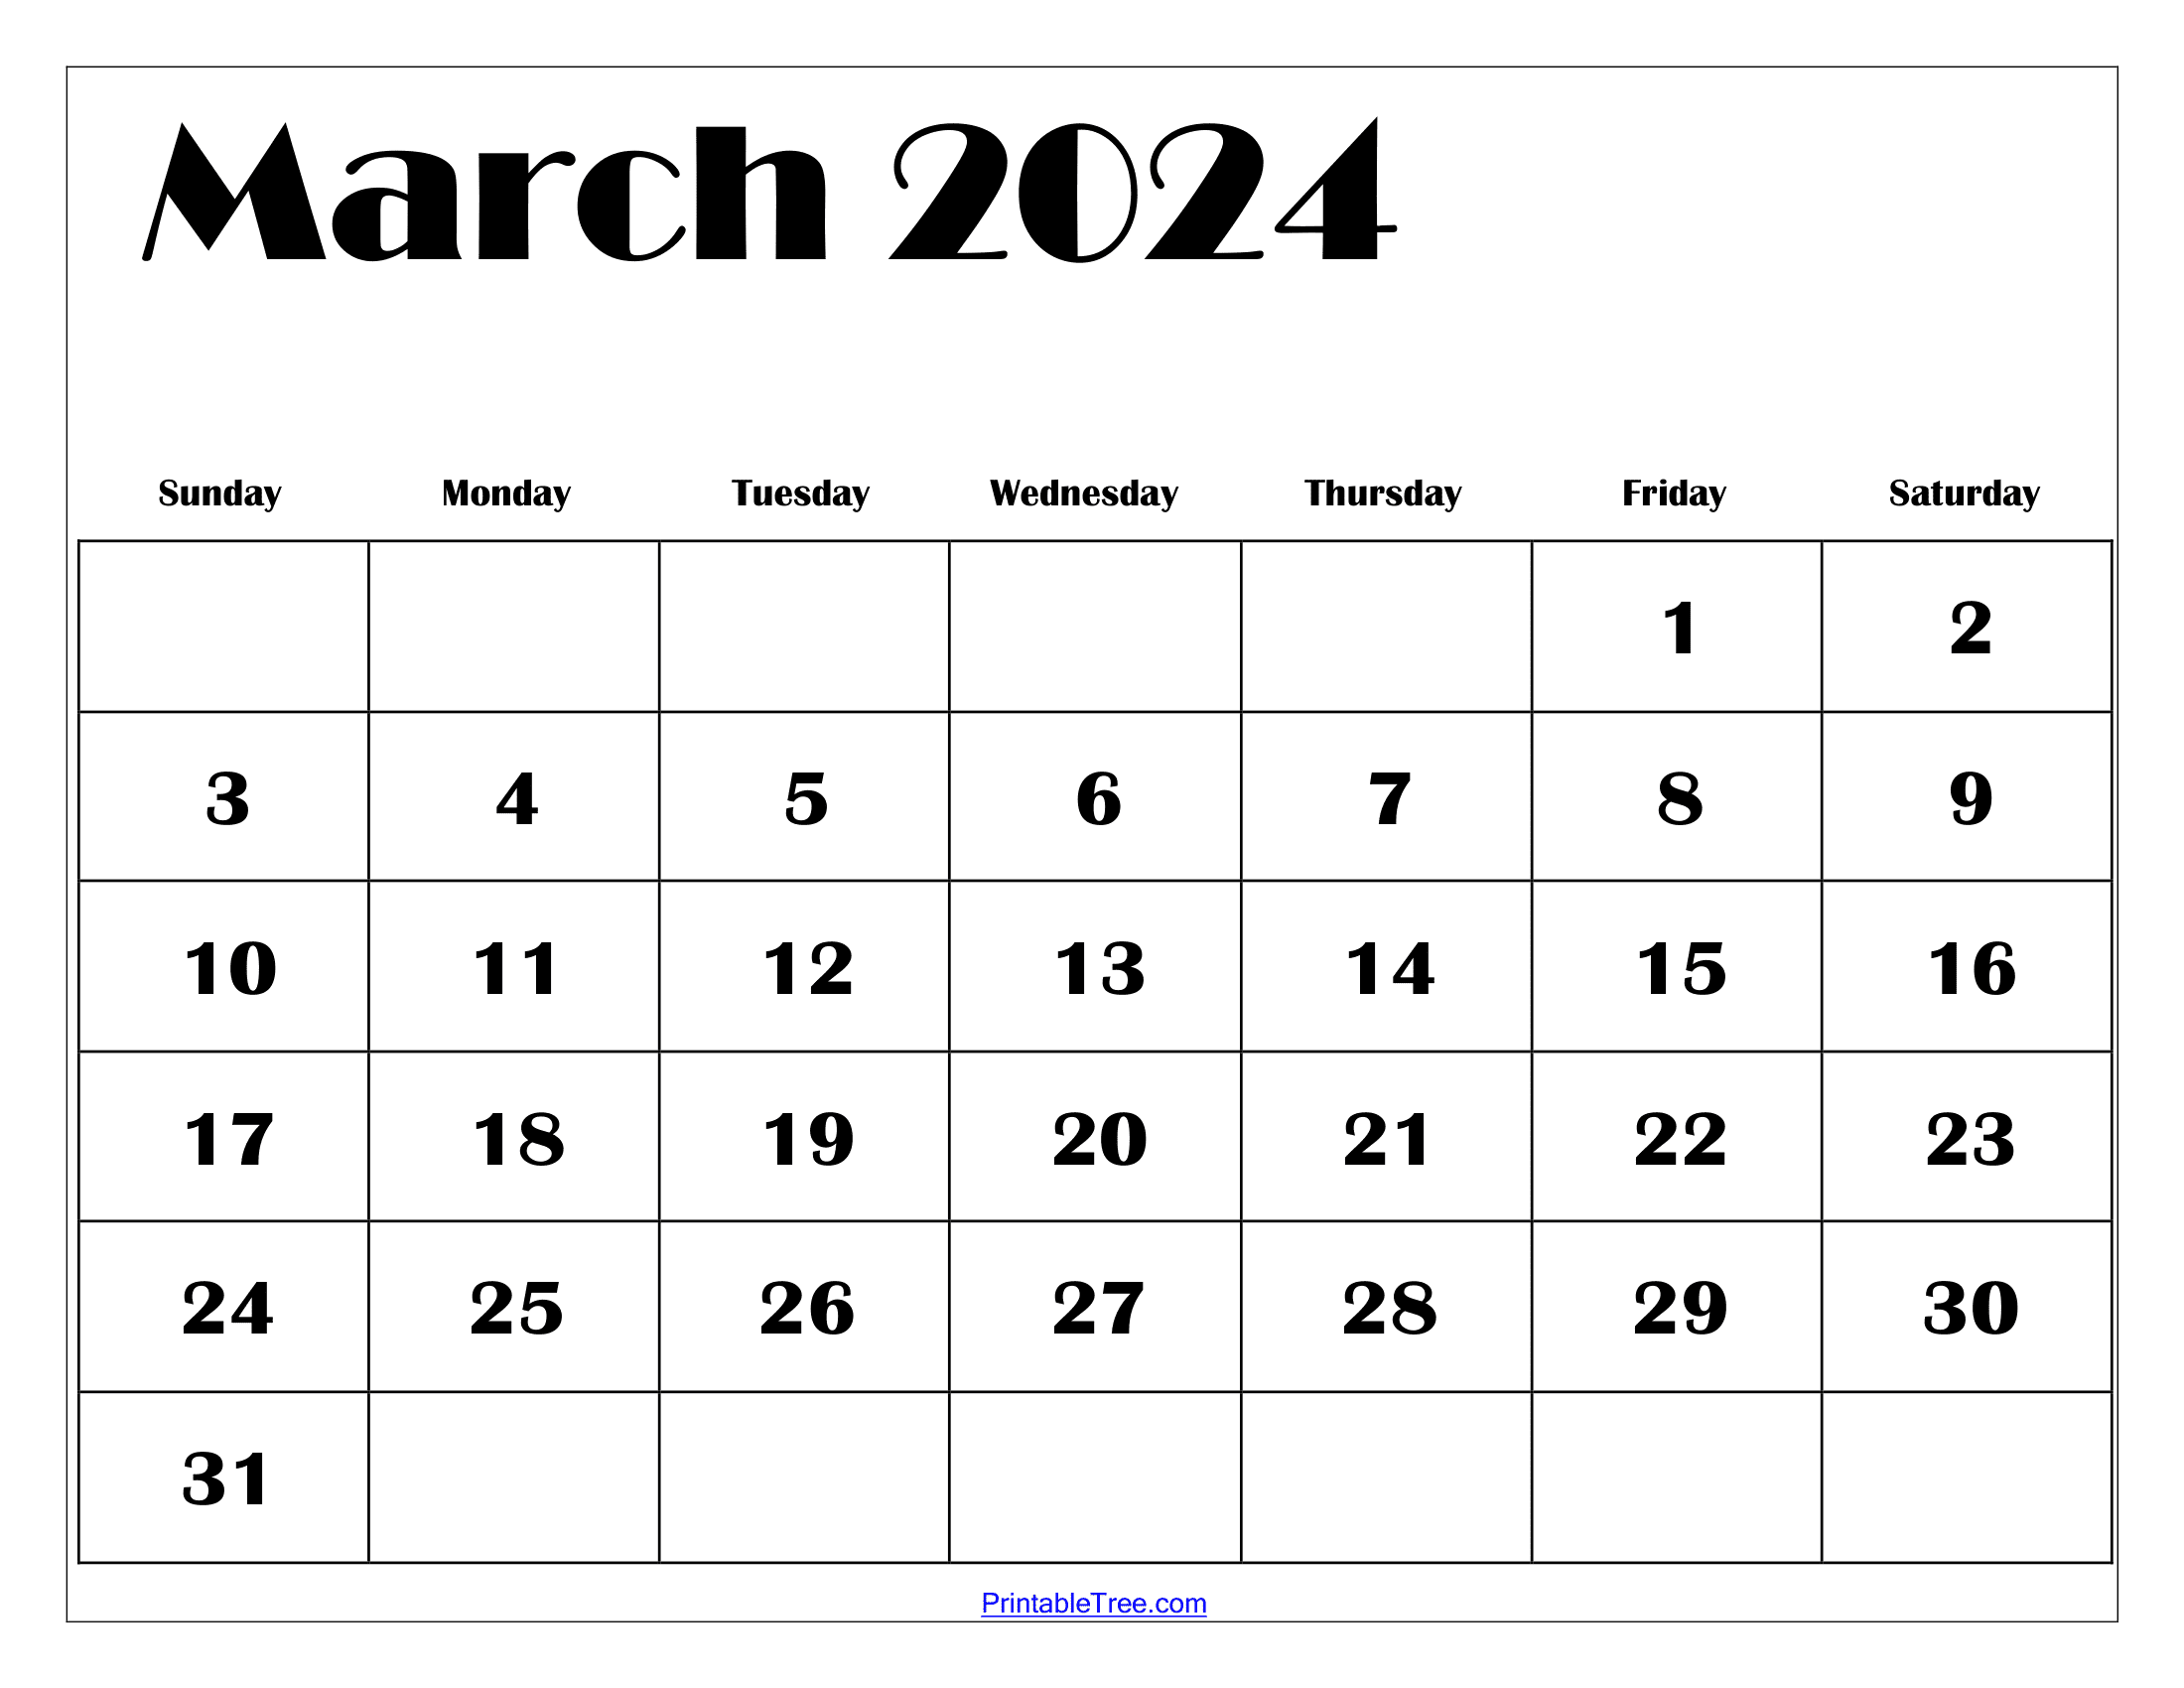 March 2024 Calendar Printable Pdf With Holidays Template Free for Calendar March 2024 Free Printable